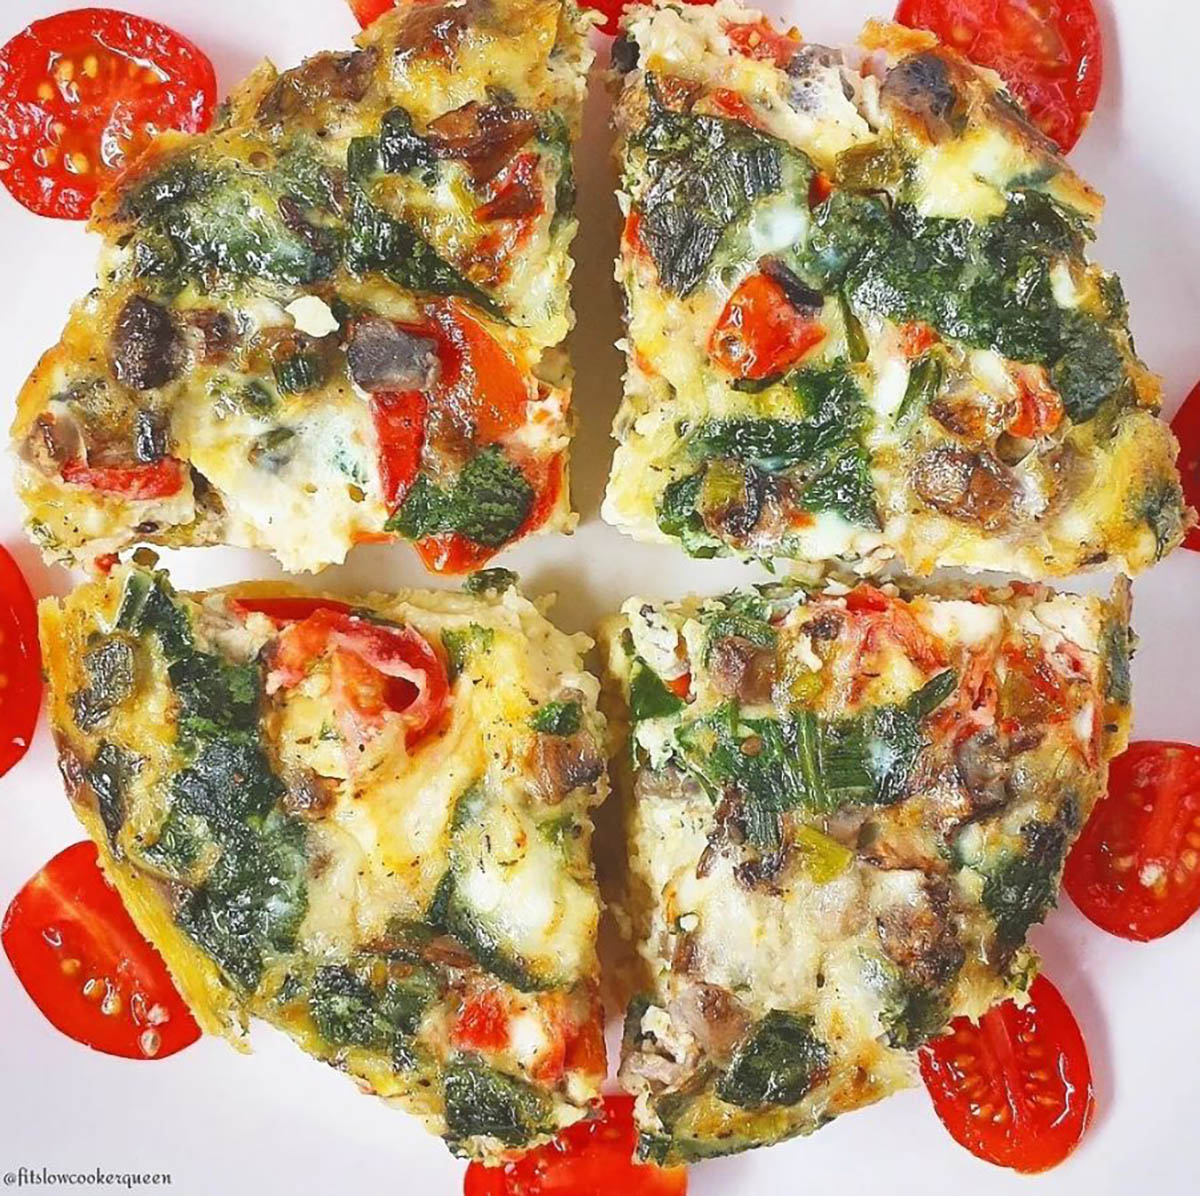 Slow Cooker Vegetable Frittata with cherry tomatoes